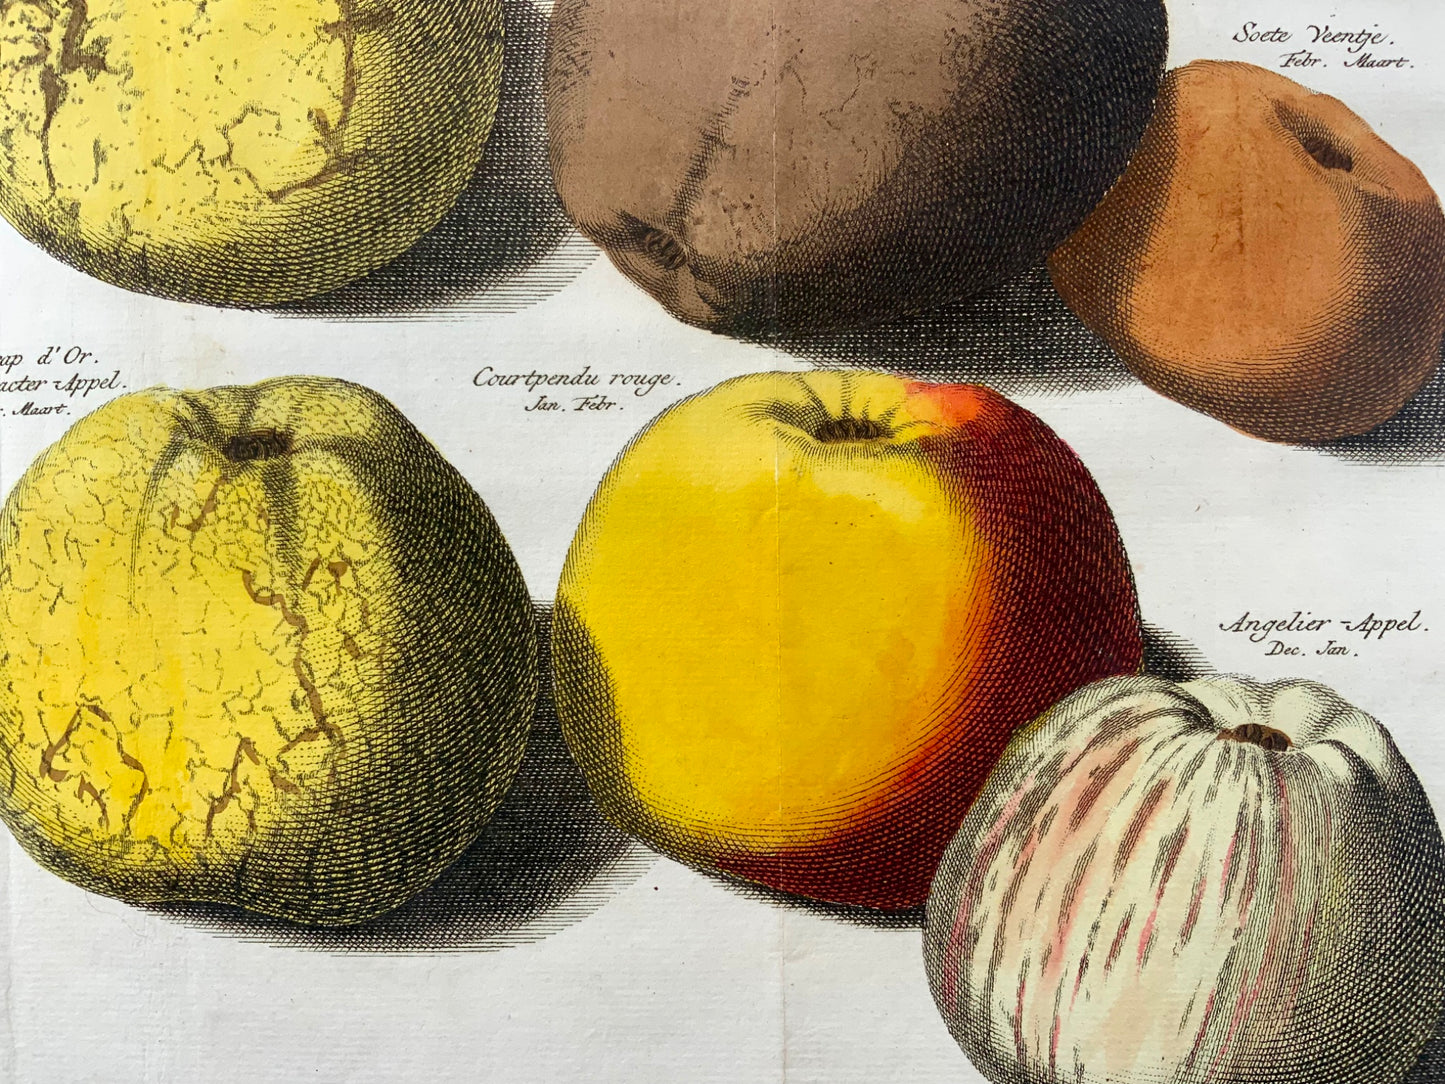 1758 Apples, fruit, folio copper engraving after Knoop by J.C. Philips, botany